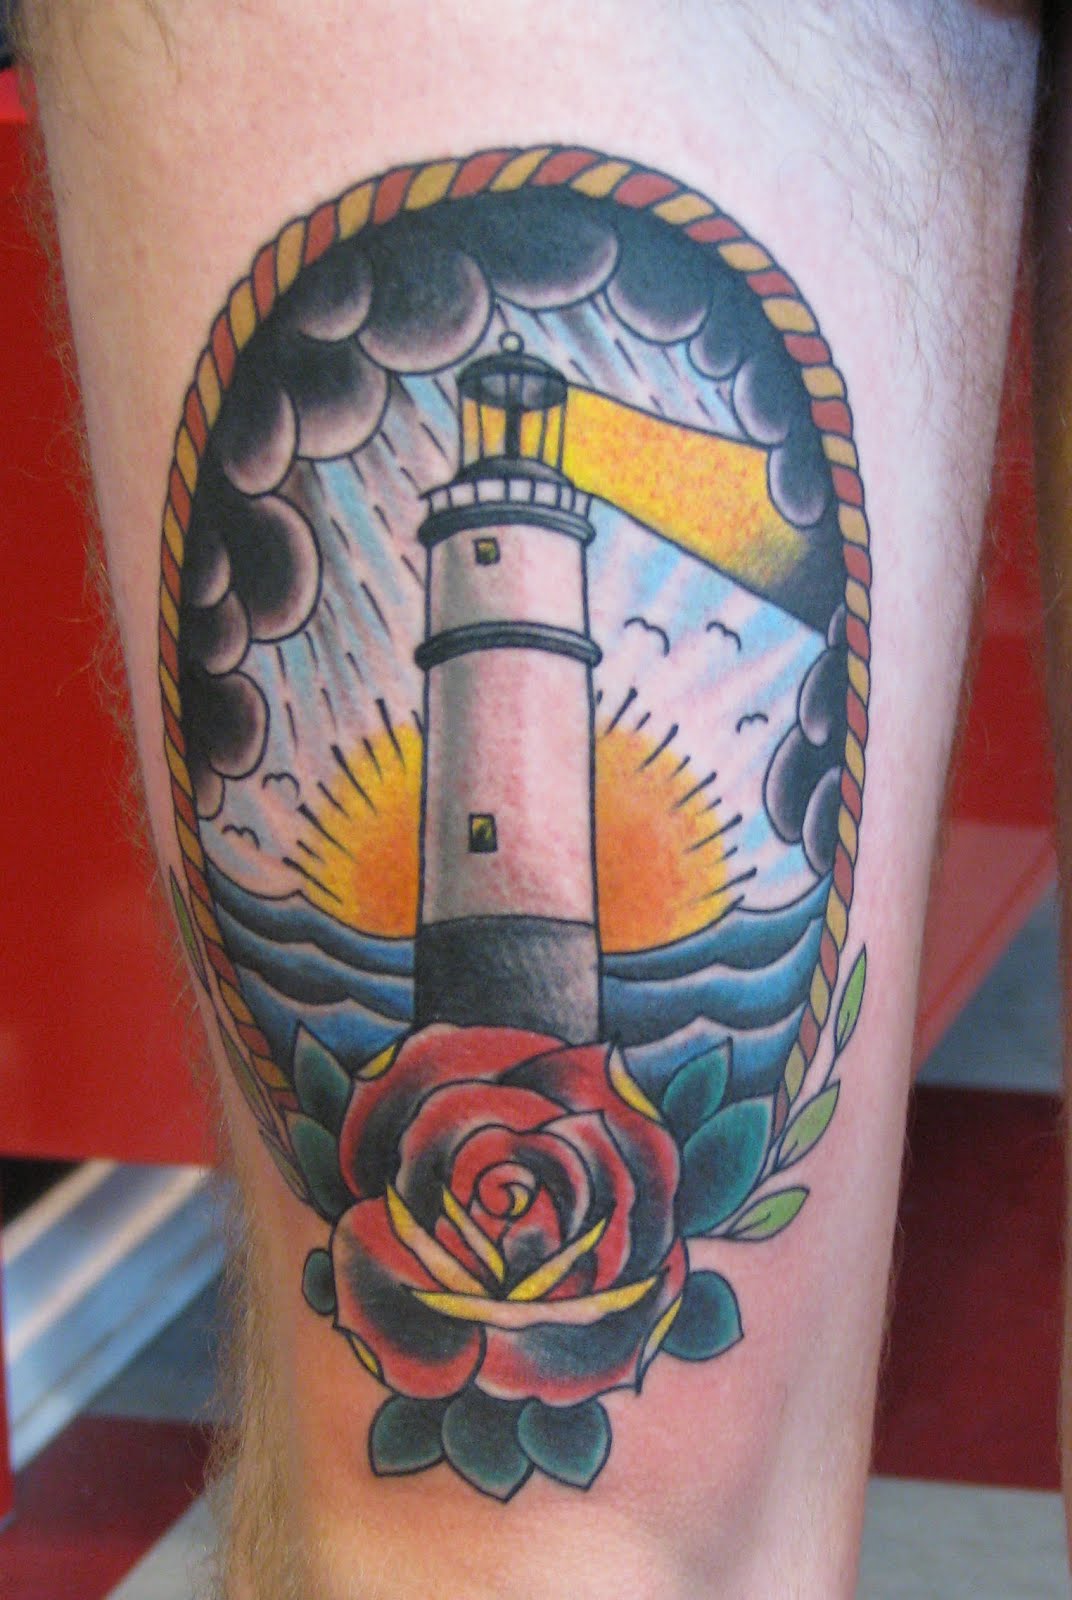 Lighthouse Tattoos Designs, Ideas and Meaning | Tattoos For You